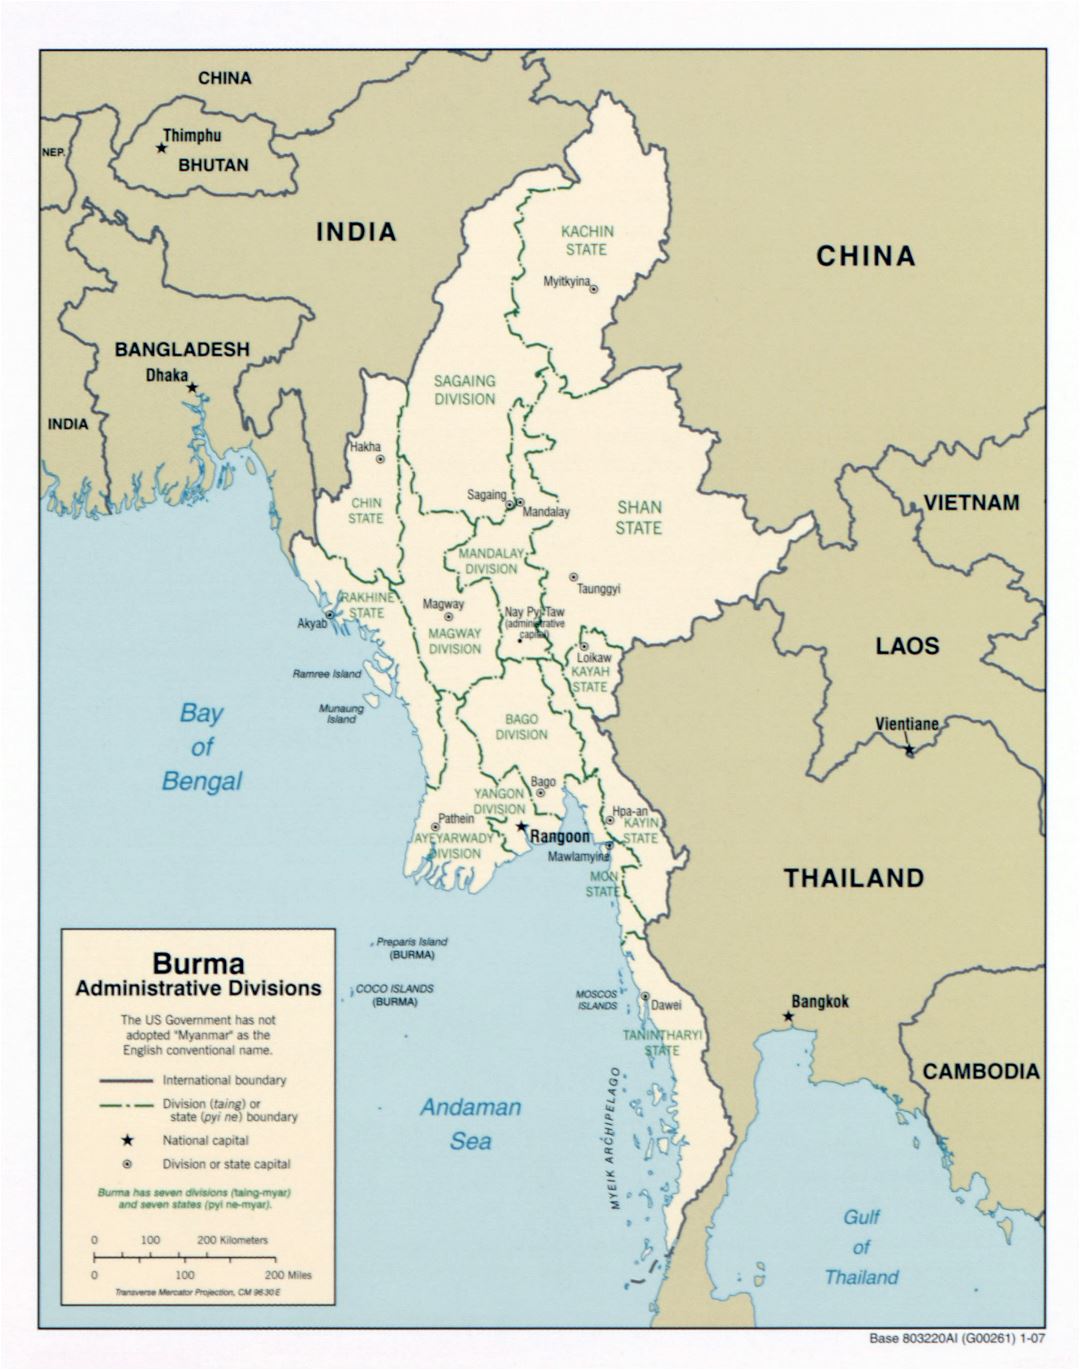 Large scale administrative divisions map of Burma (Myanmar) - 2007